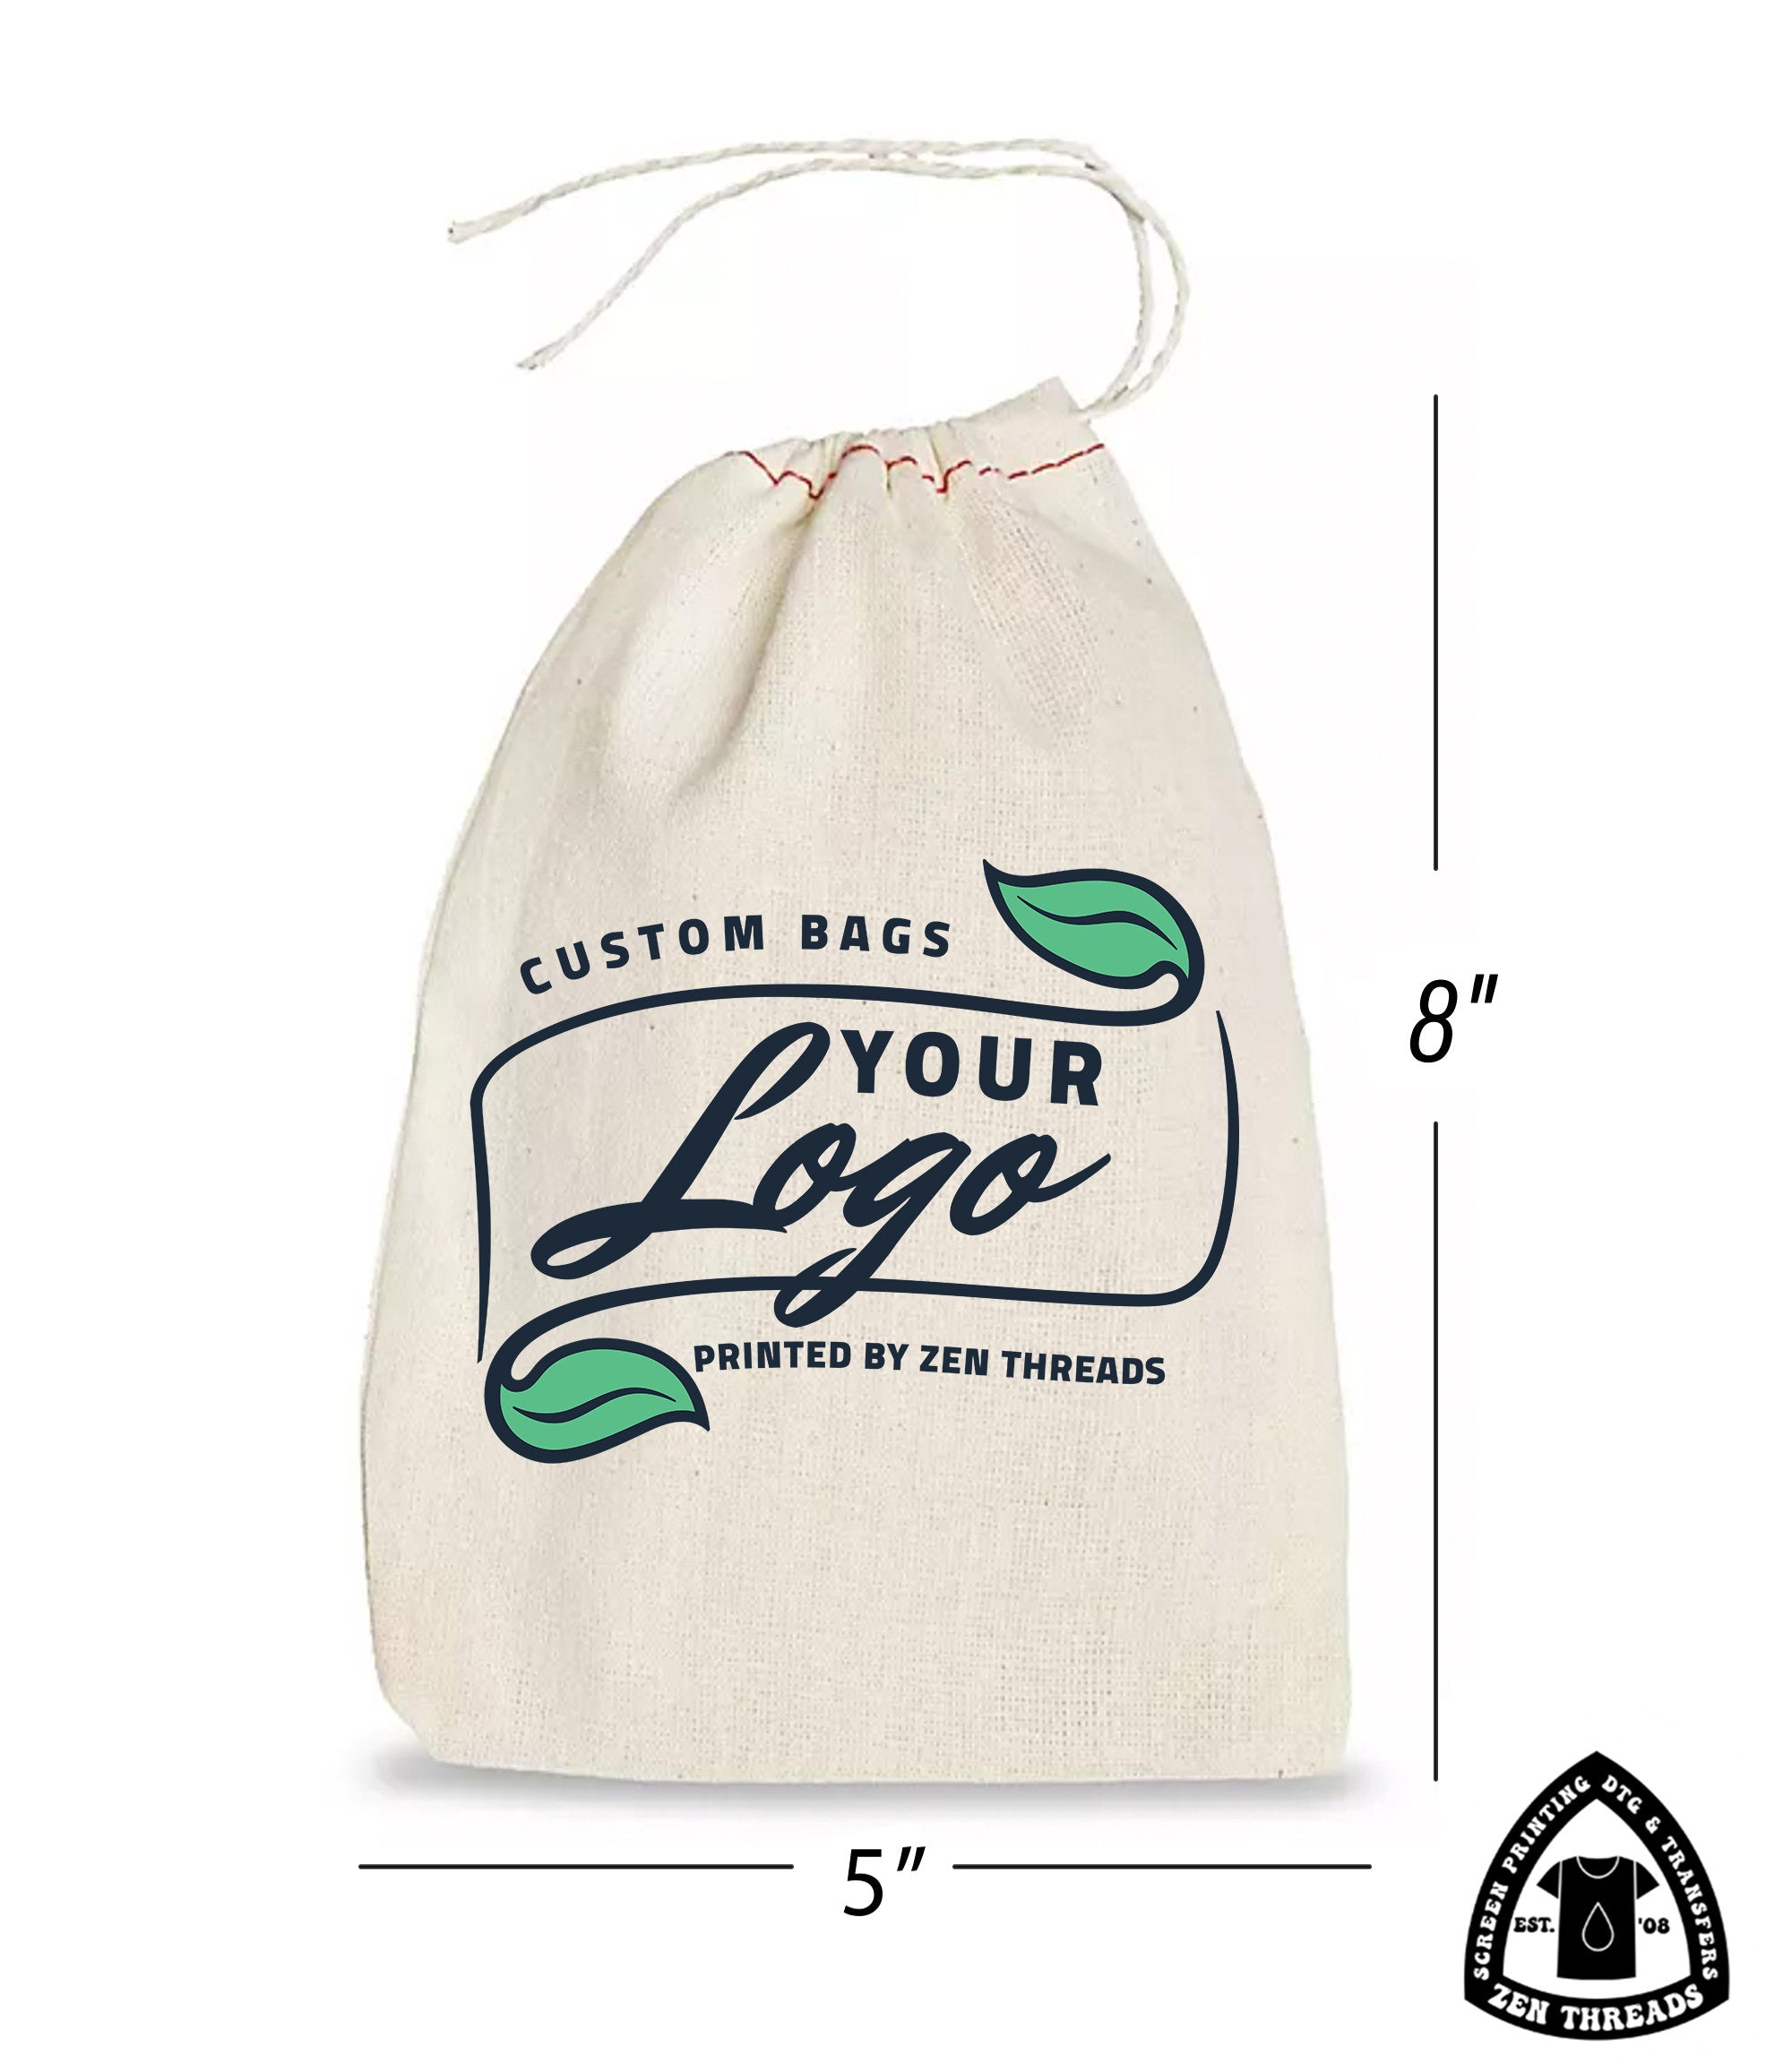 1.5l 150g recycled cotton gift bag - 30x25cm